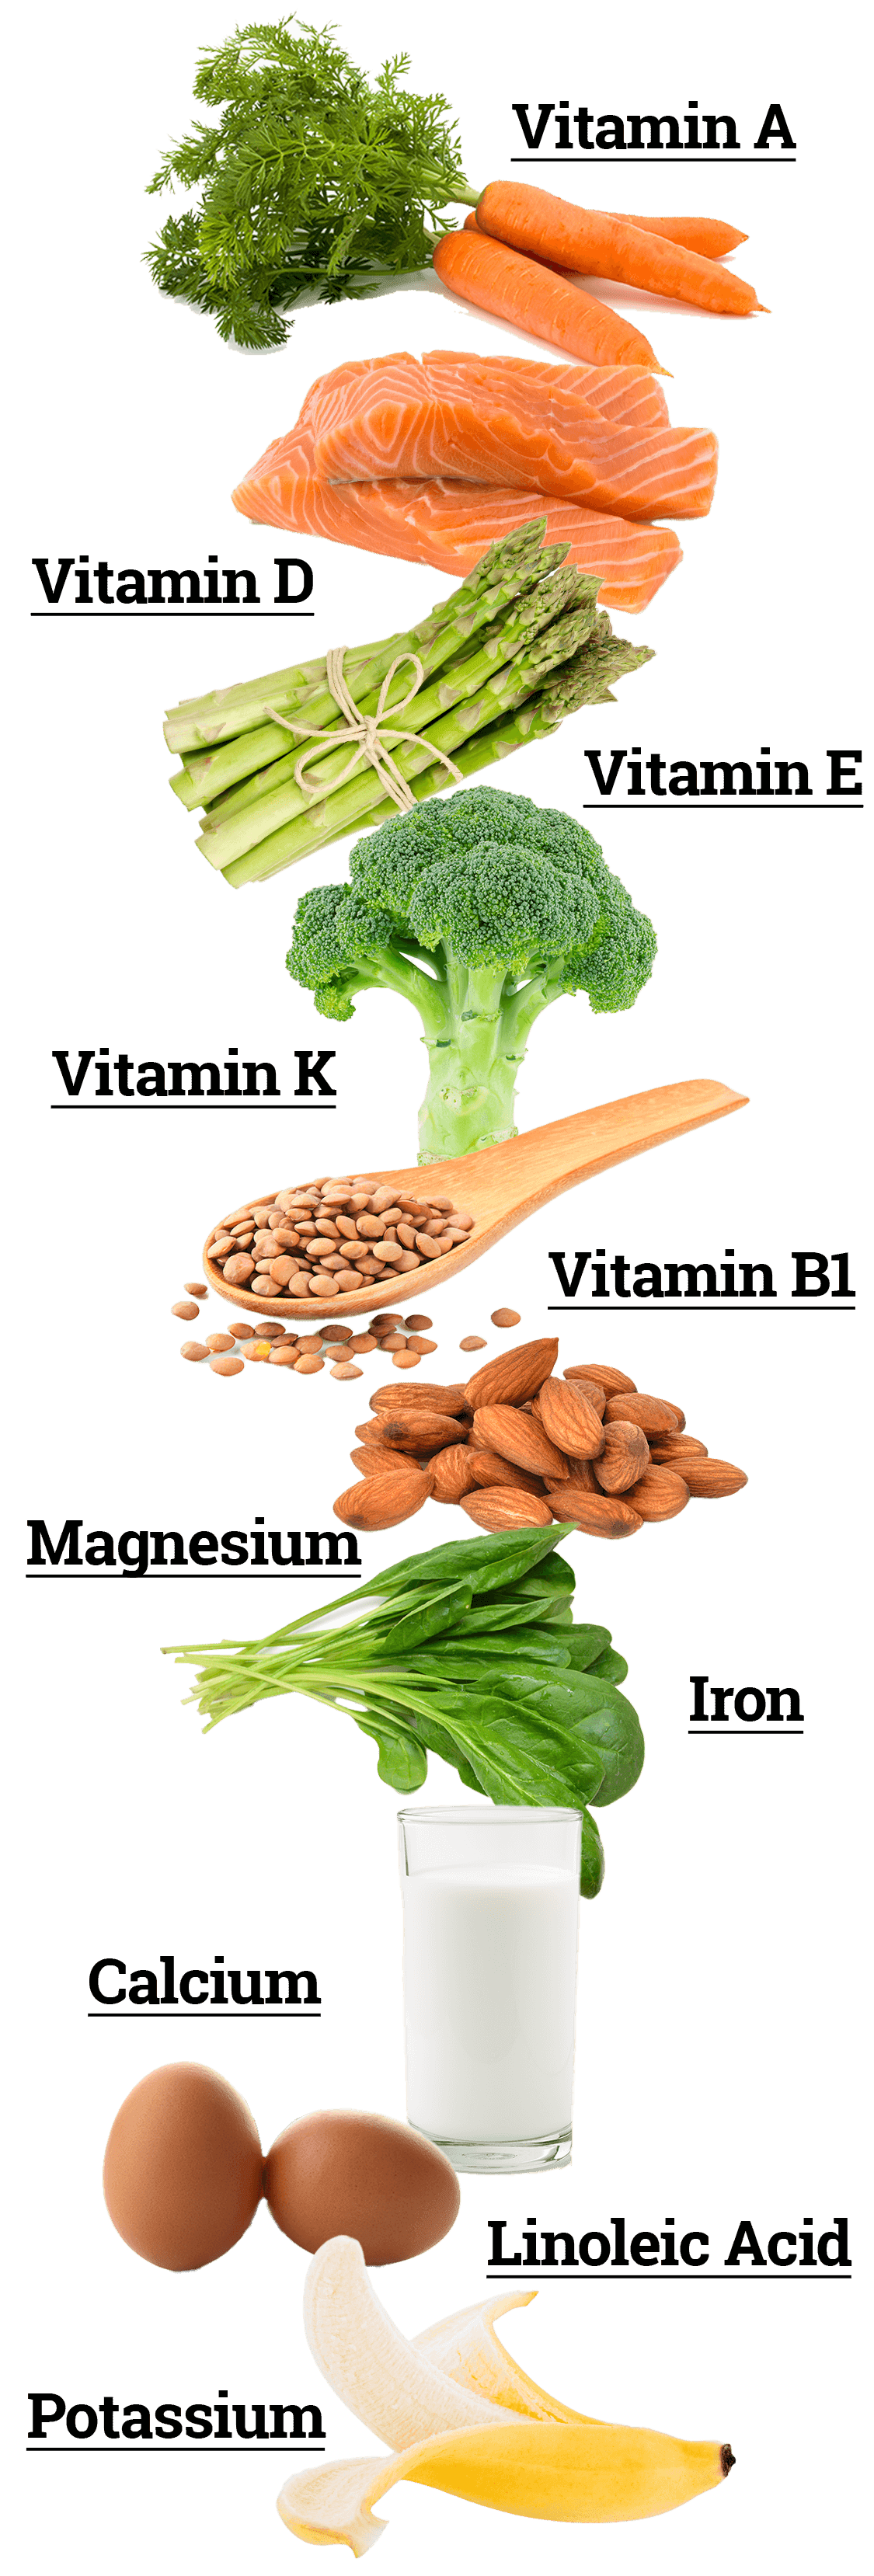 Image of the different types of vitamins and minerals found in Talló Balm as represented by other vegetables and foods